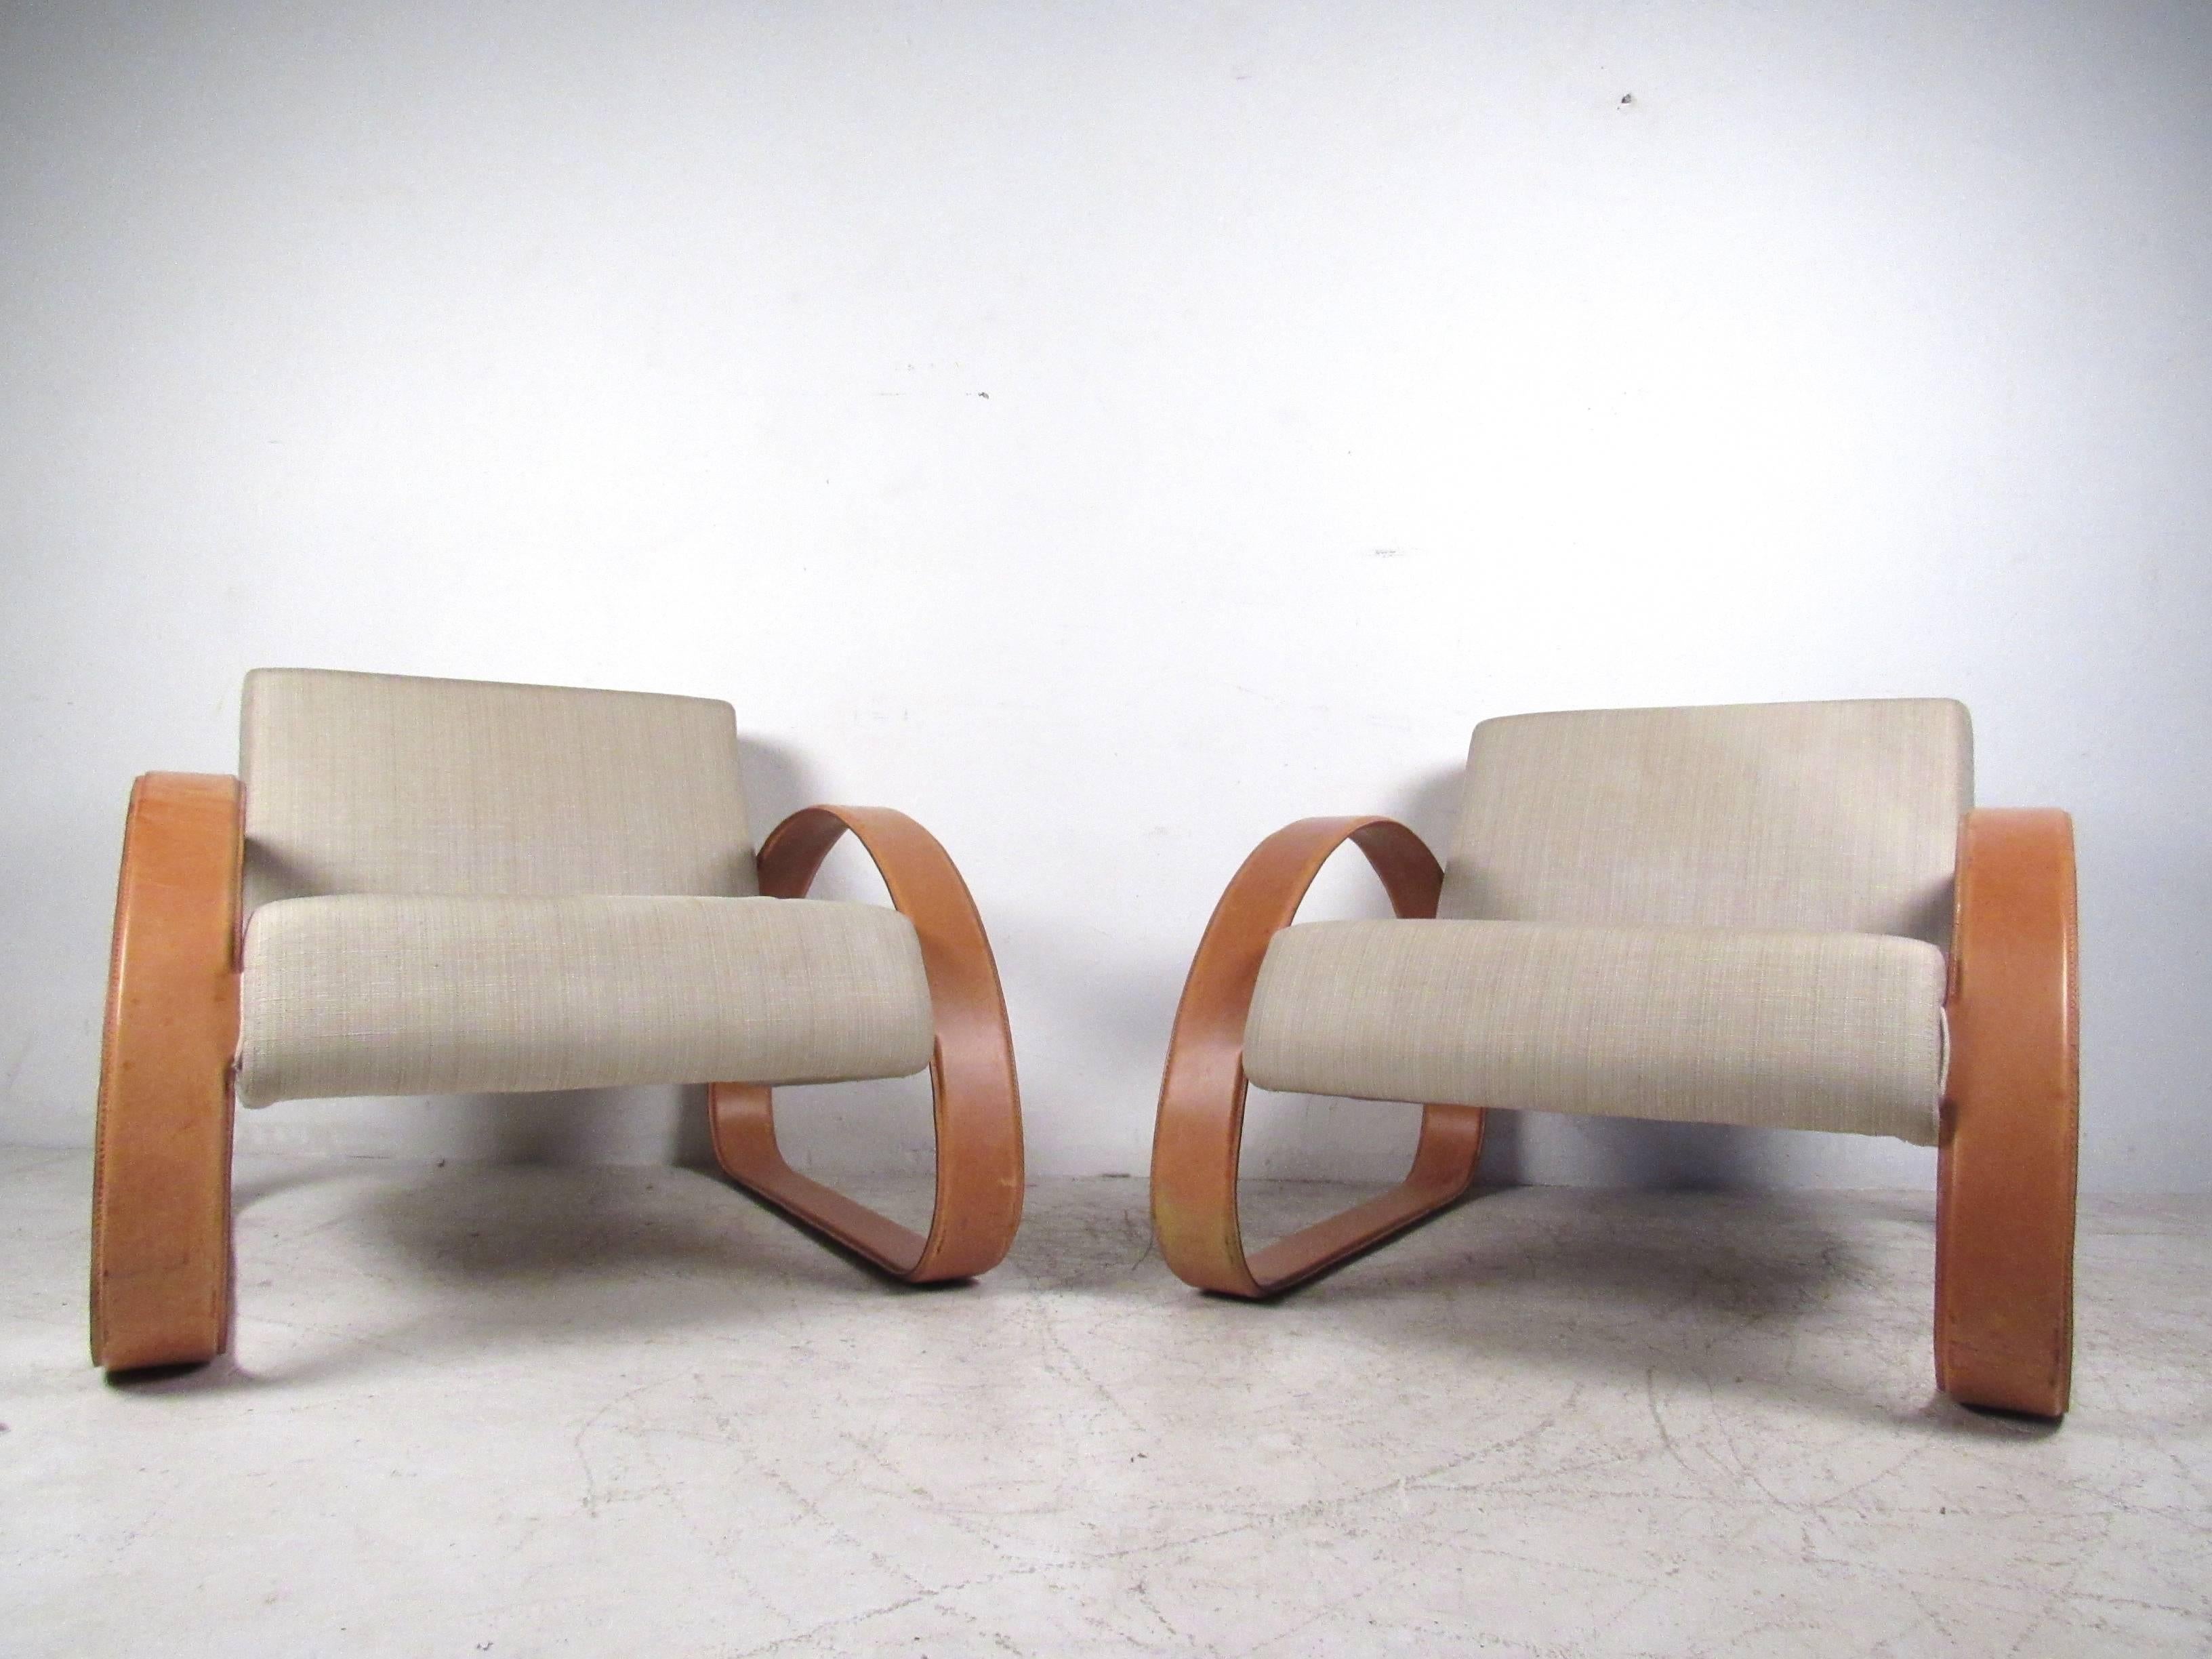 This stylish pair of Mid-Century style lounge chairs by Armani Casa make an impressive addition to any interior. The unique leather frame compliments the wide and accommodating seats, while angled backs add comfortable support. Please confirm item